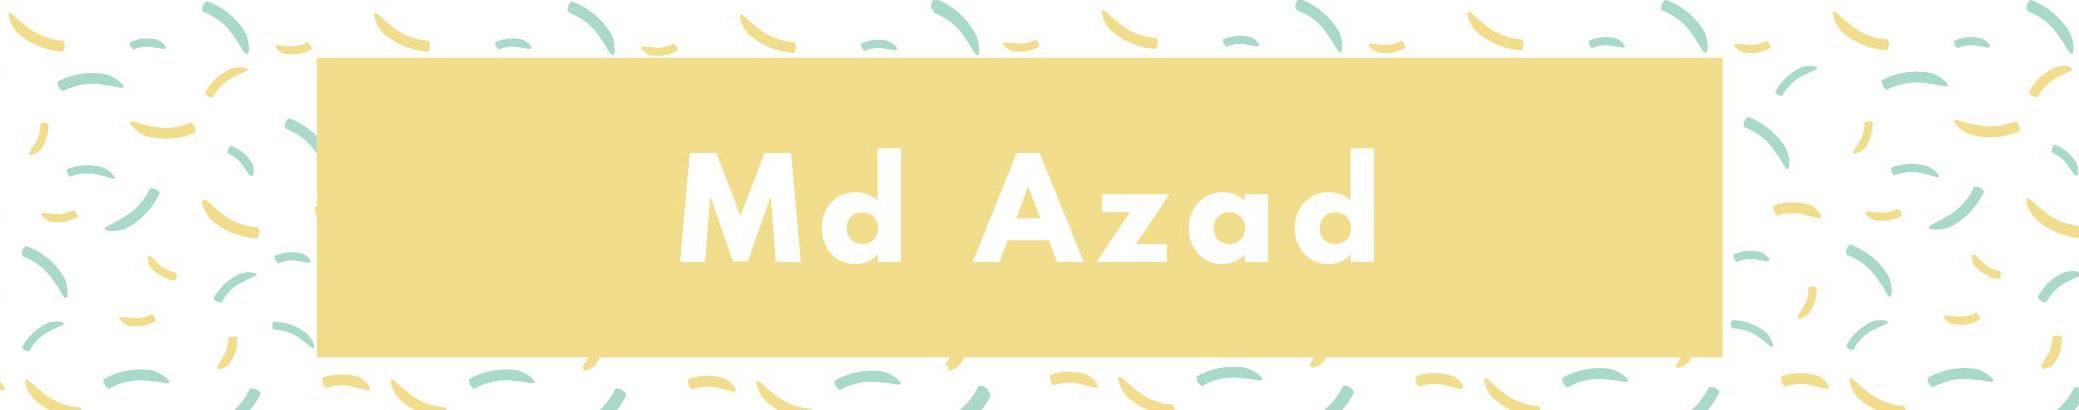 md Azad's profile banner